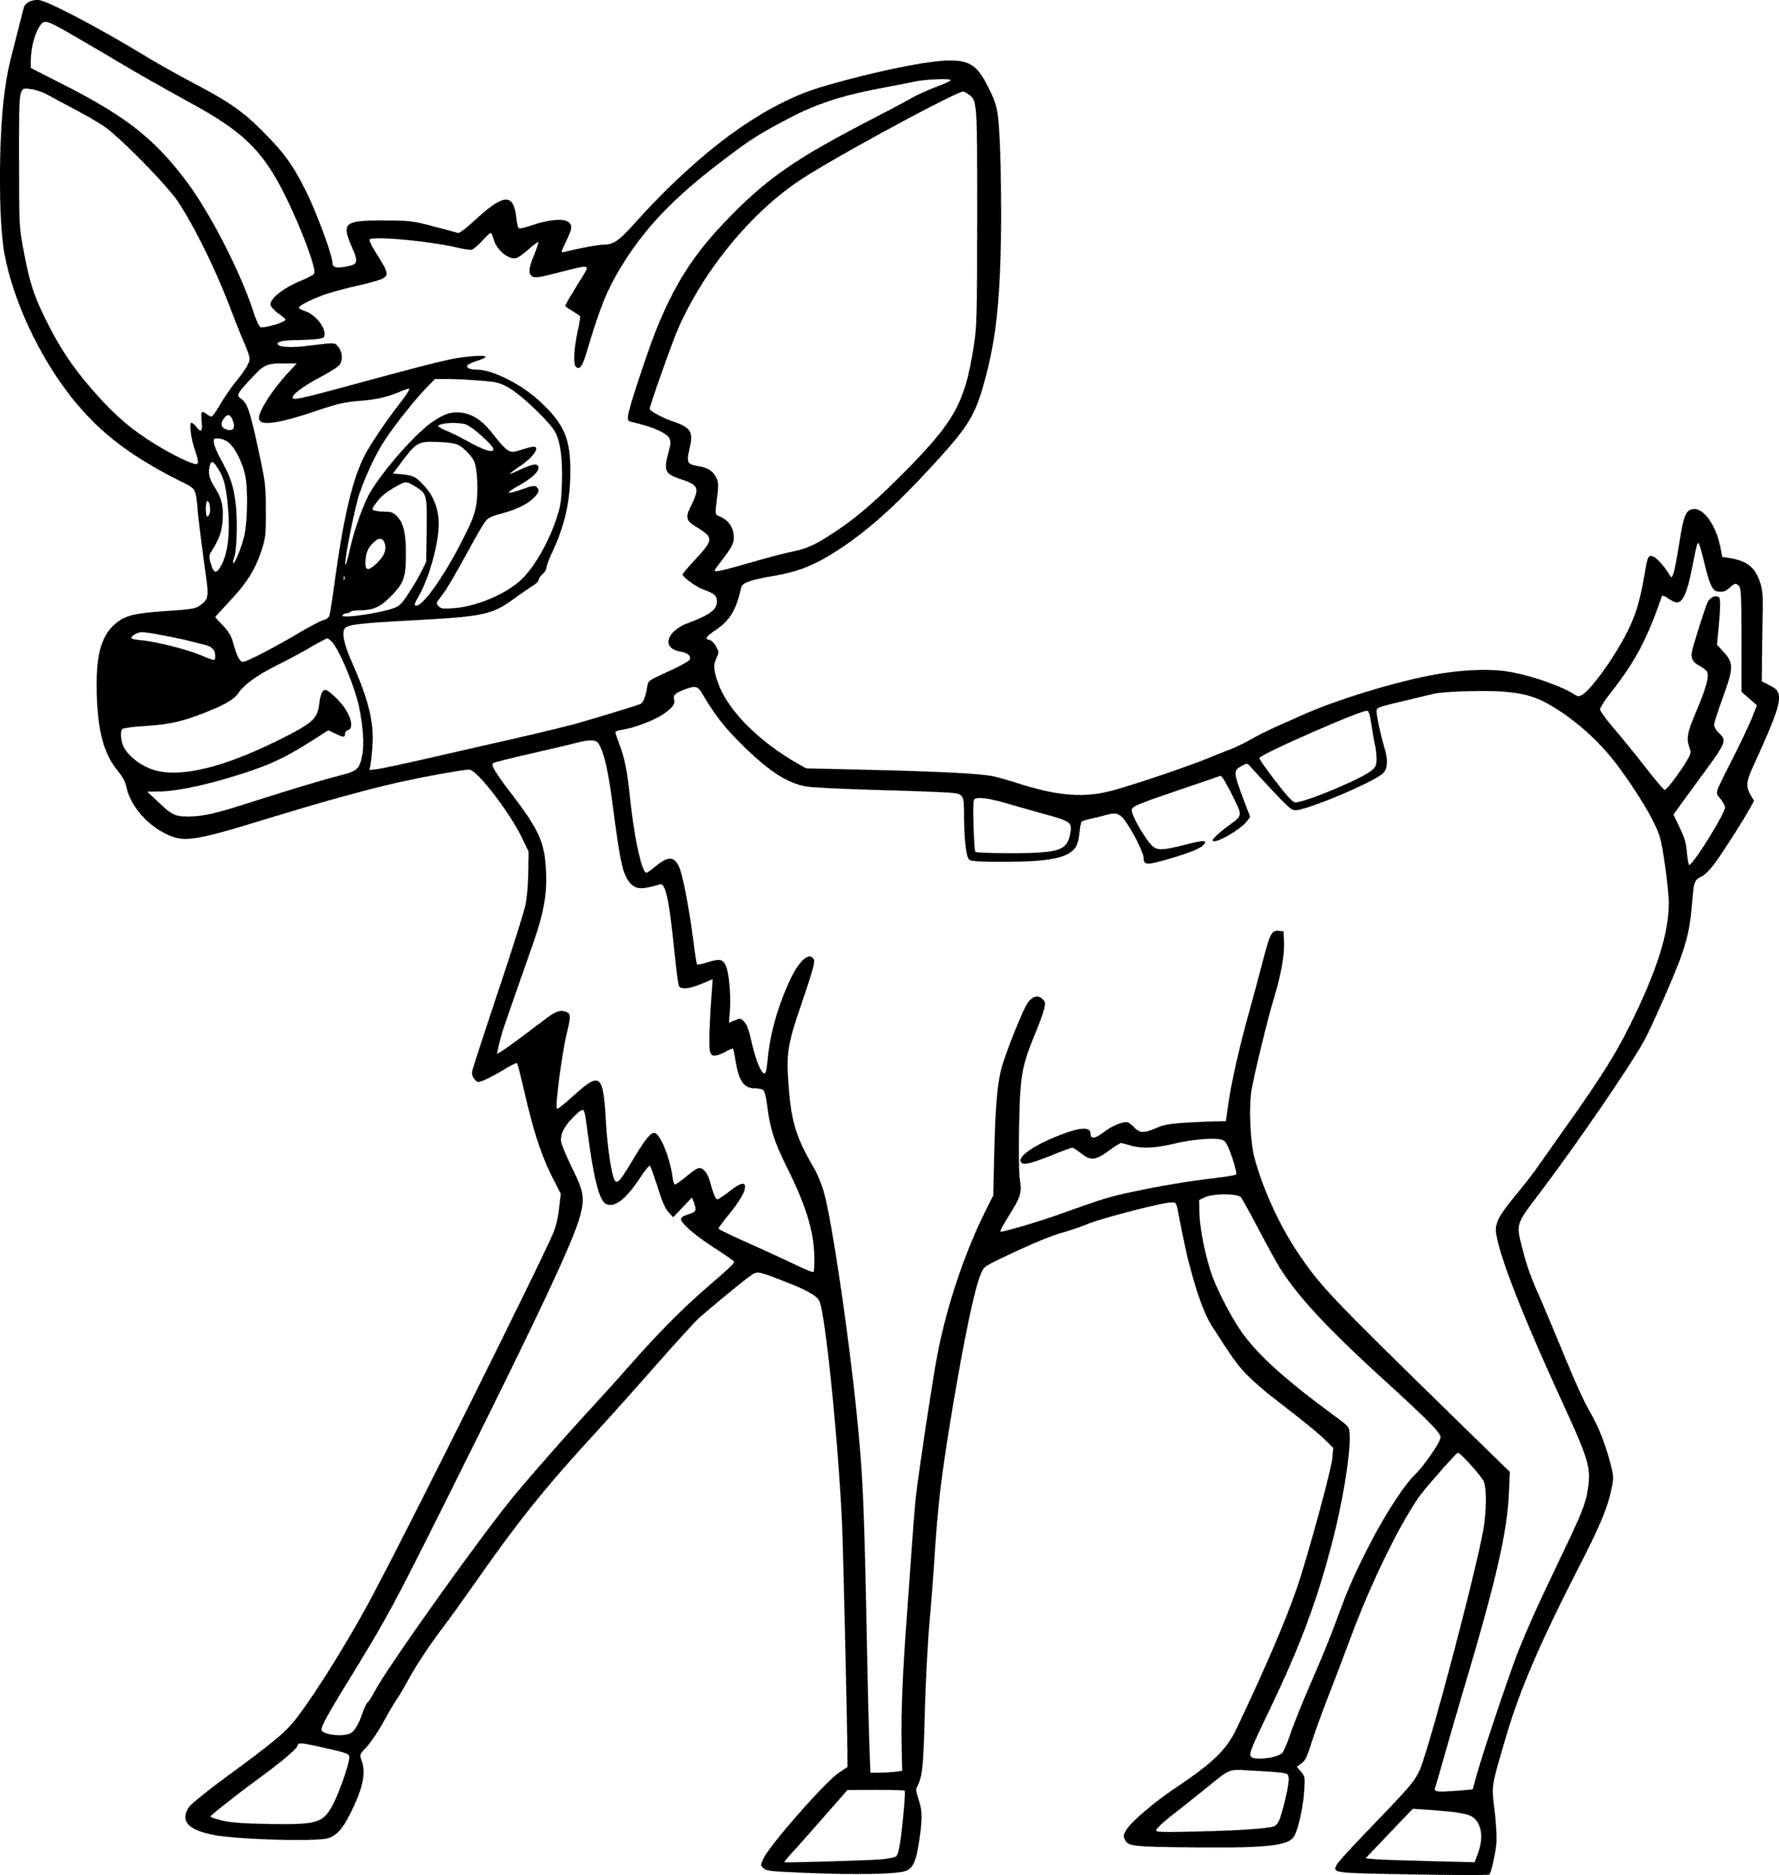 Fawn Deer Coloring Page